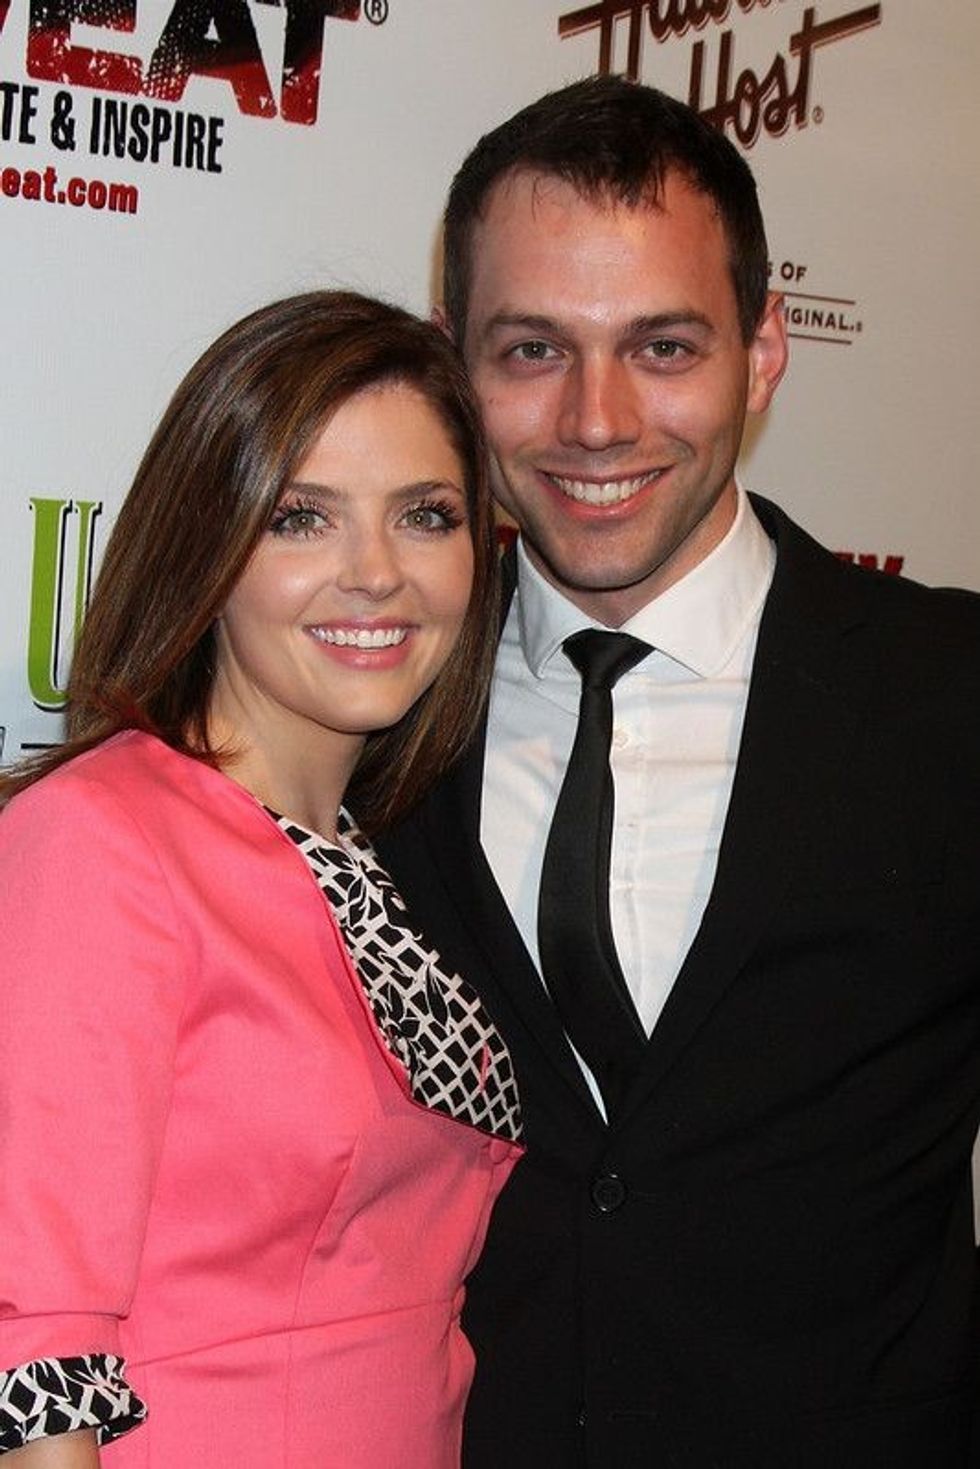 Interesting facts about Jason Wayne, his birthday, and his net worth reveal that he has contributed to various charities along with her wife Jen Lilley